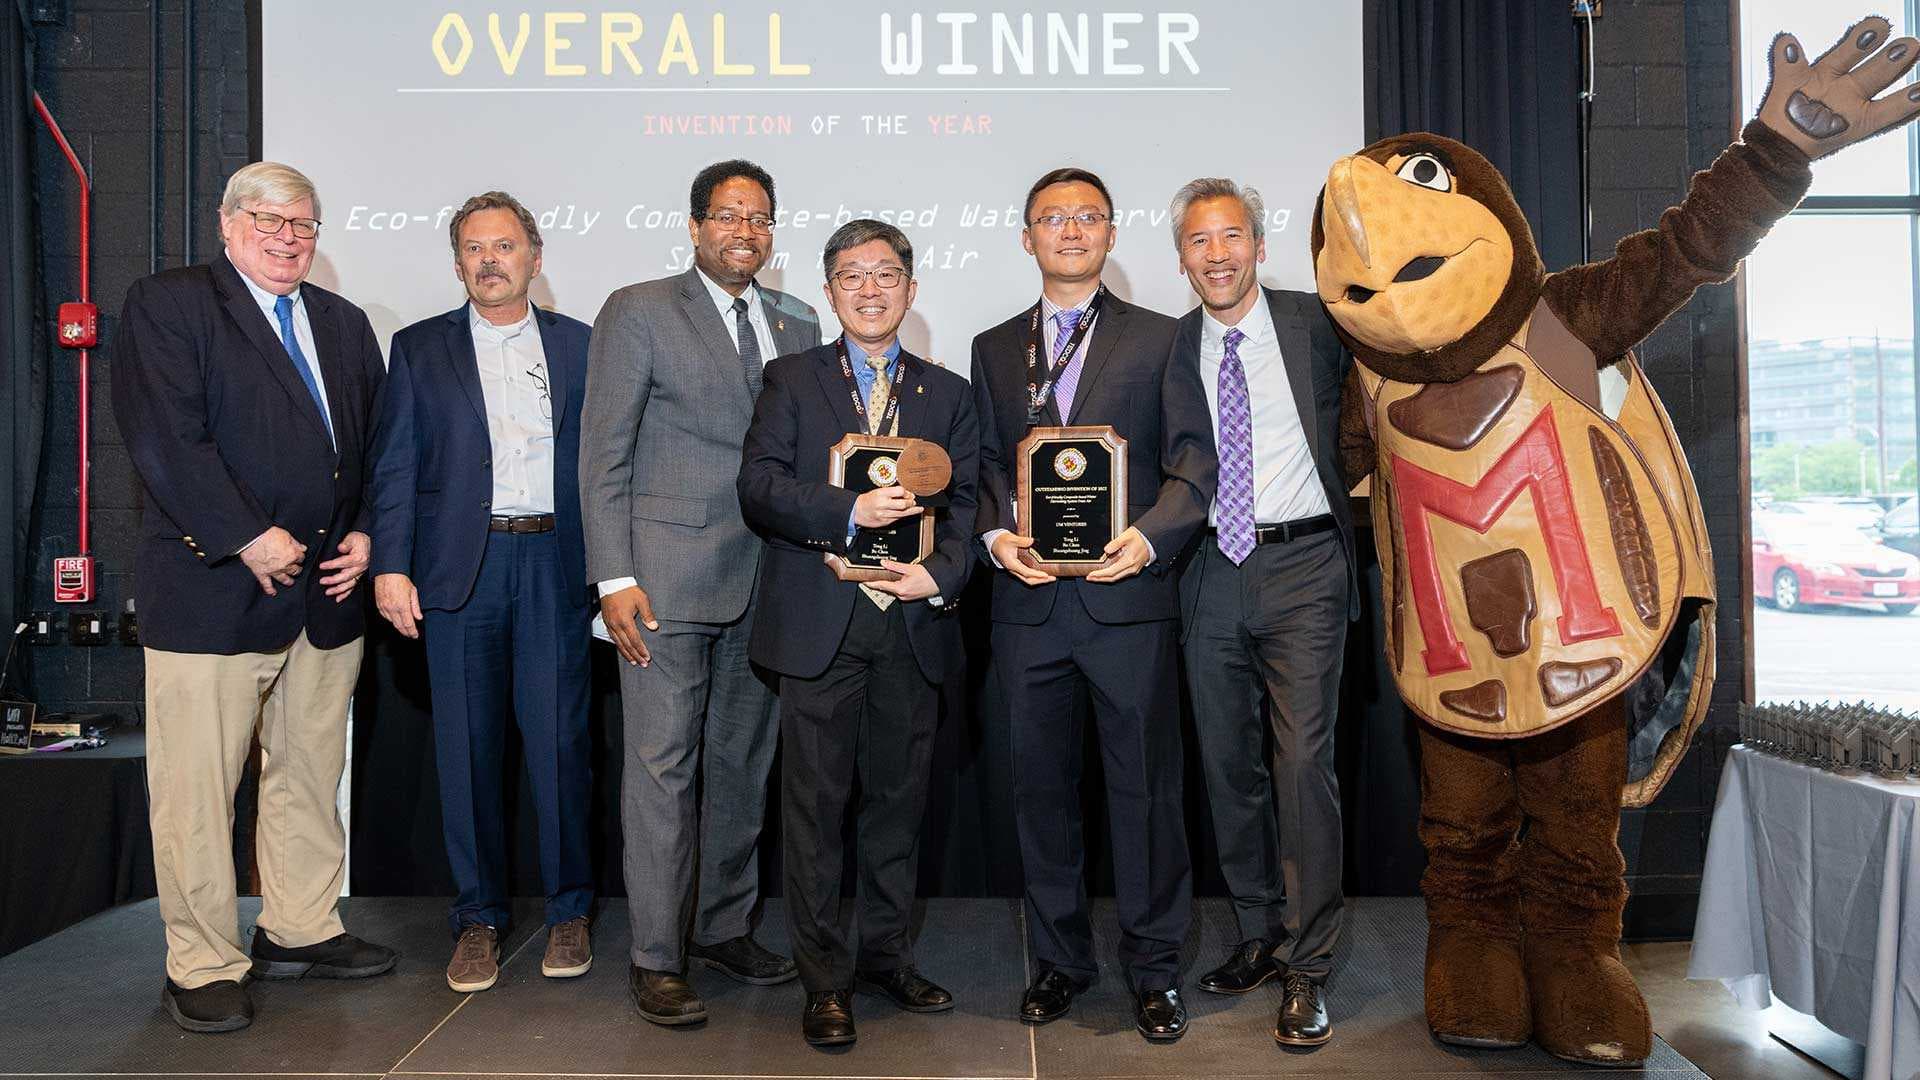 Invention of the Year winners hold awards on stage with Testudo and UMD leaders